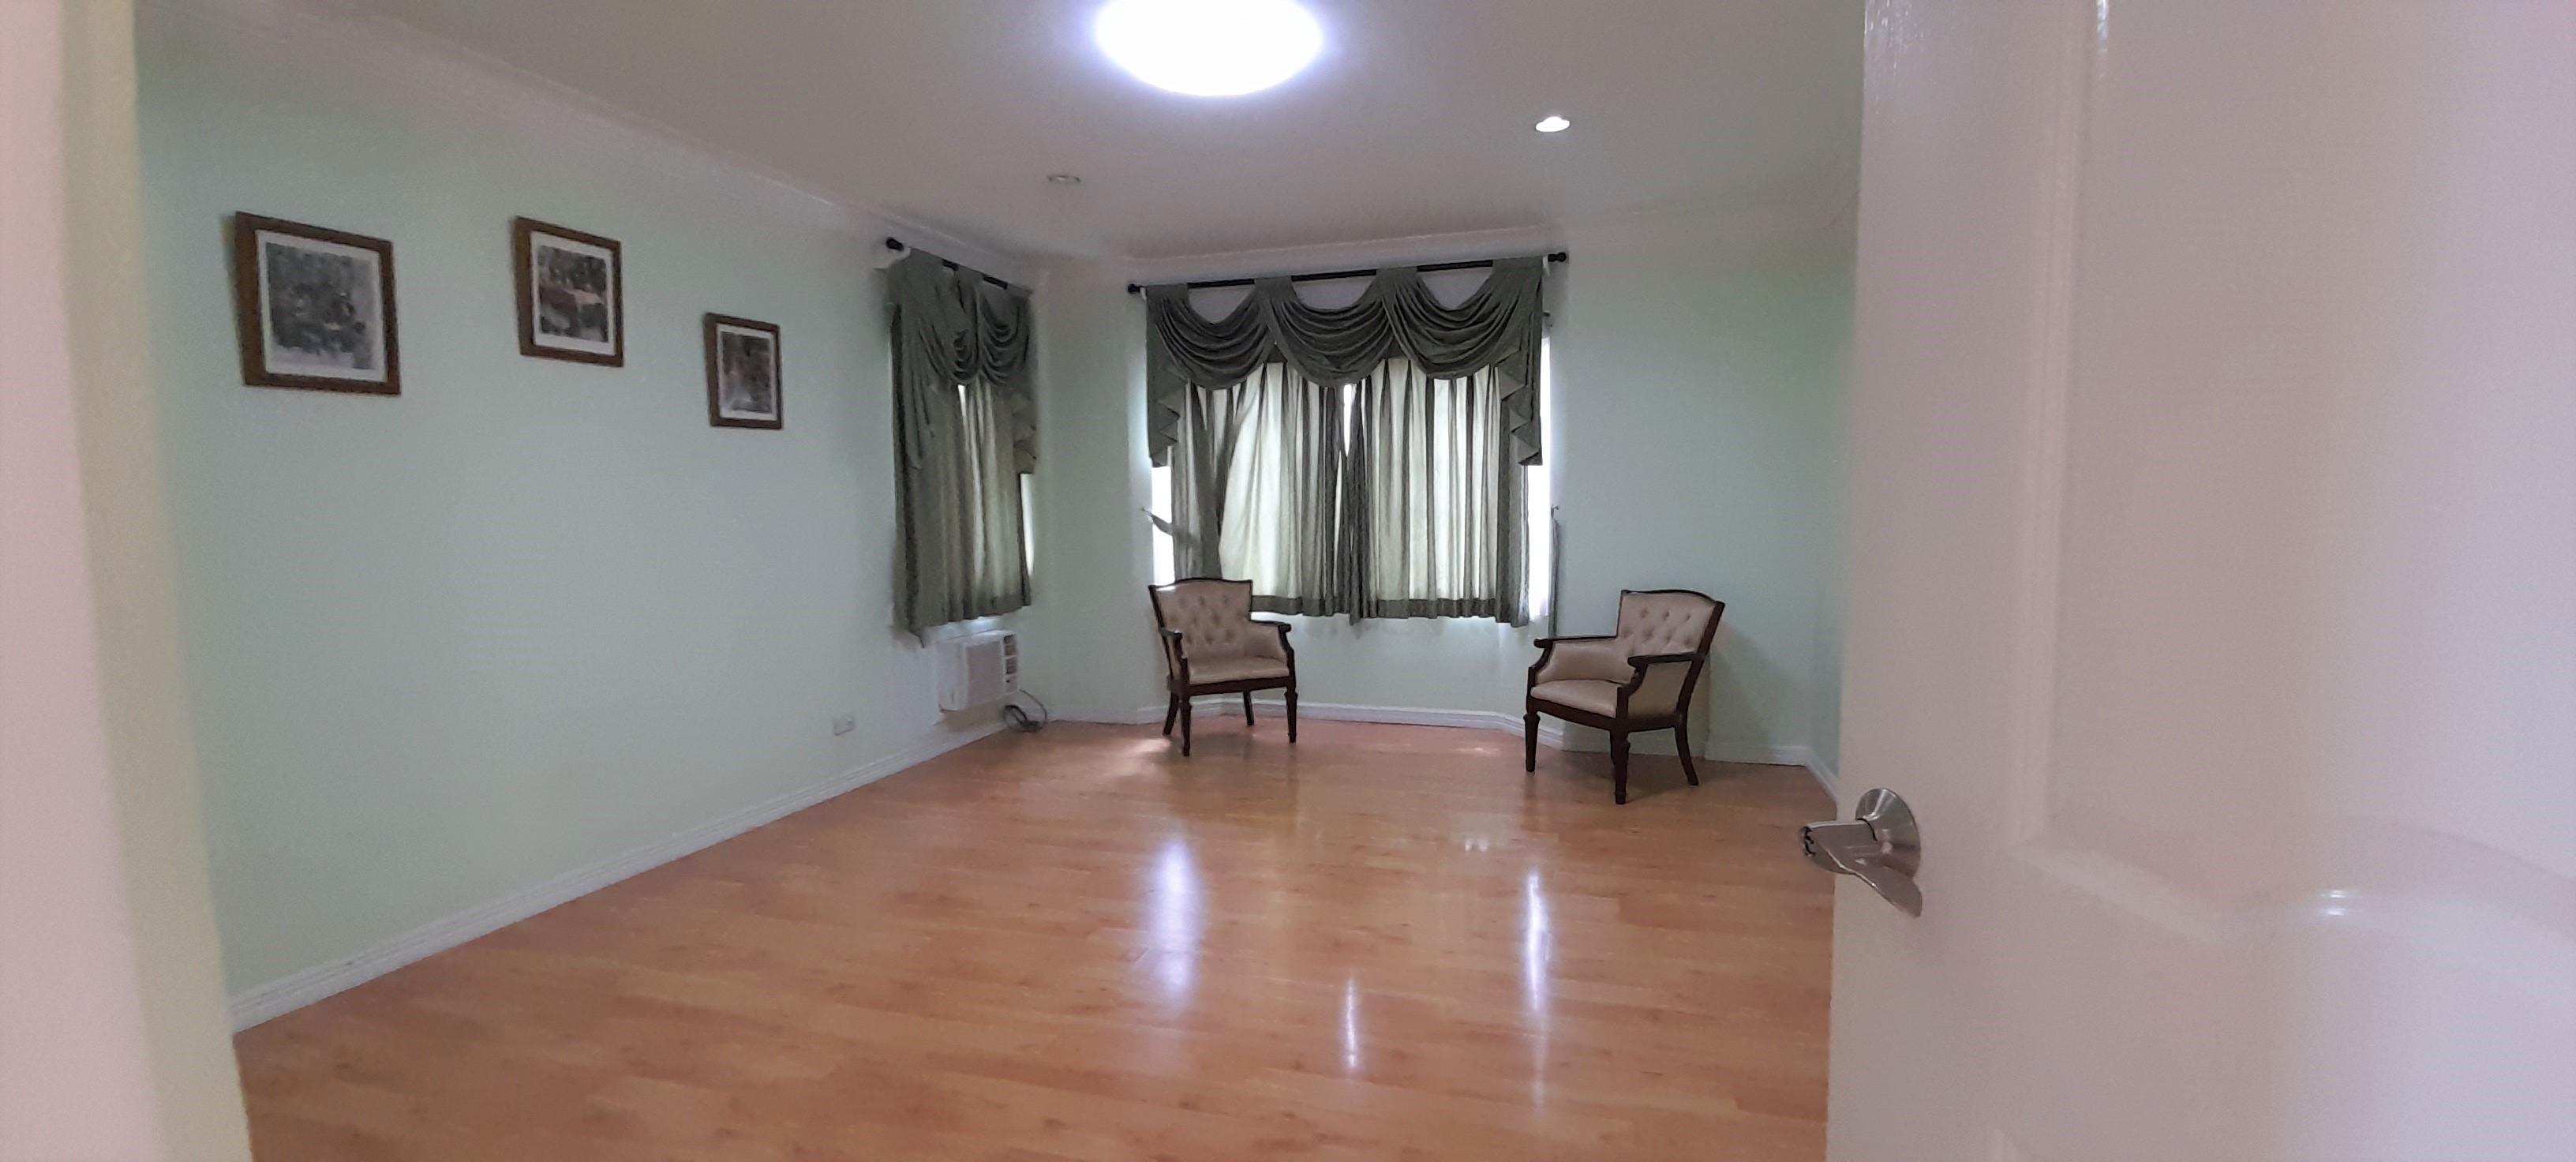 8-bedroom-house-in-guadalupe-cebu-city-with-more-car-parking